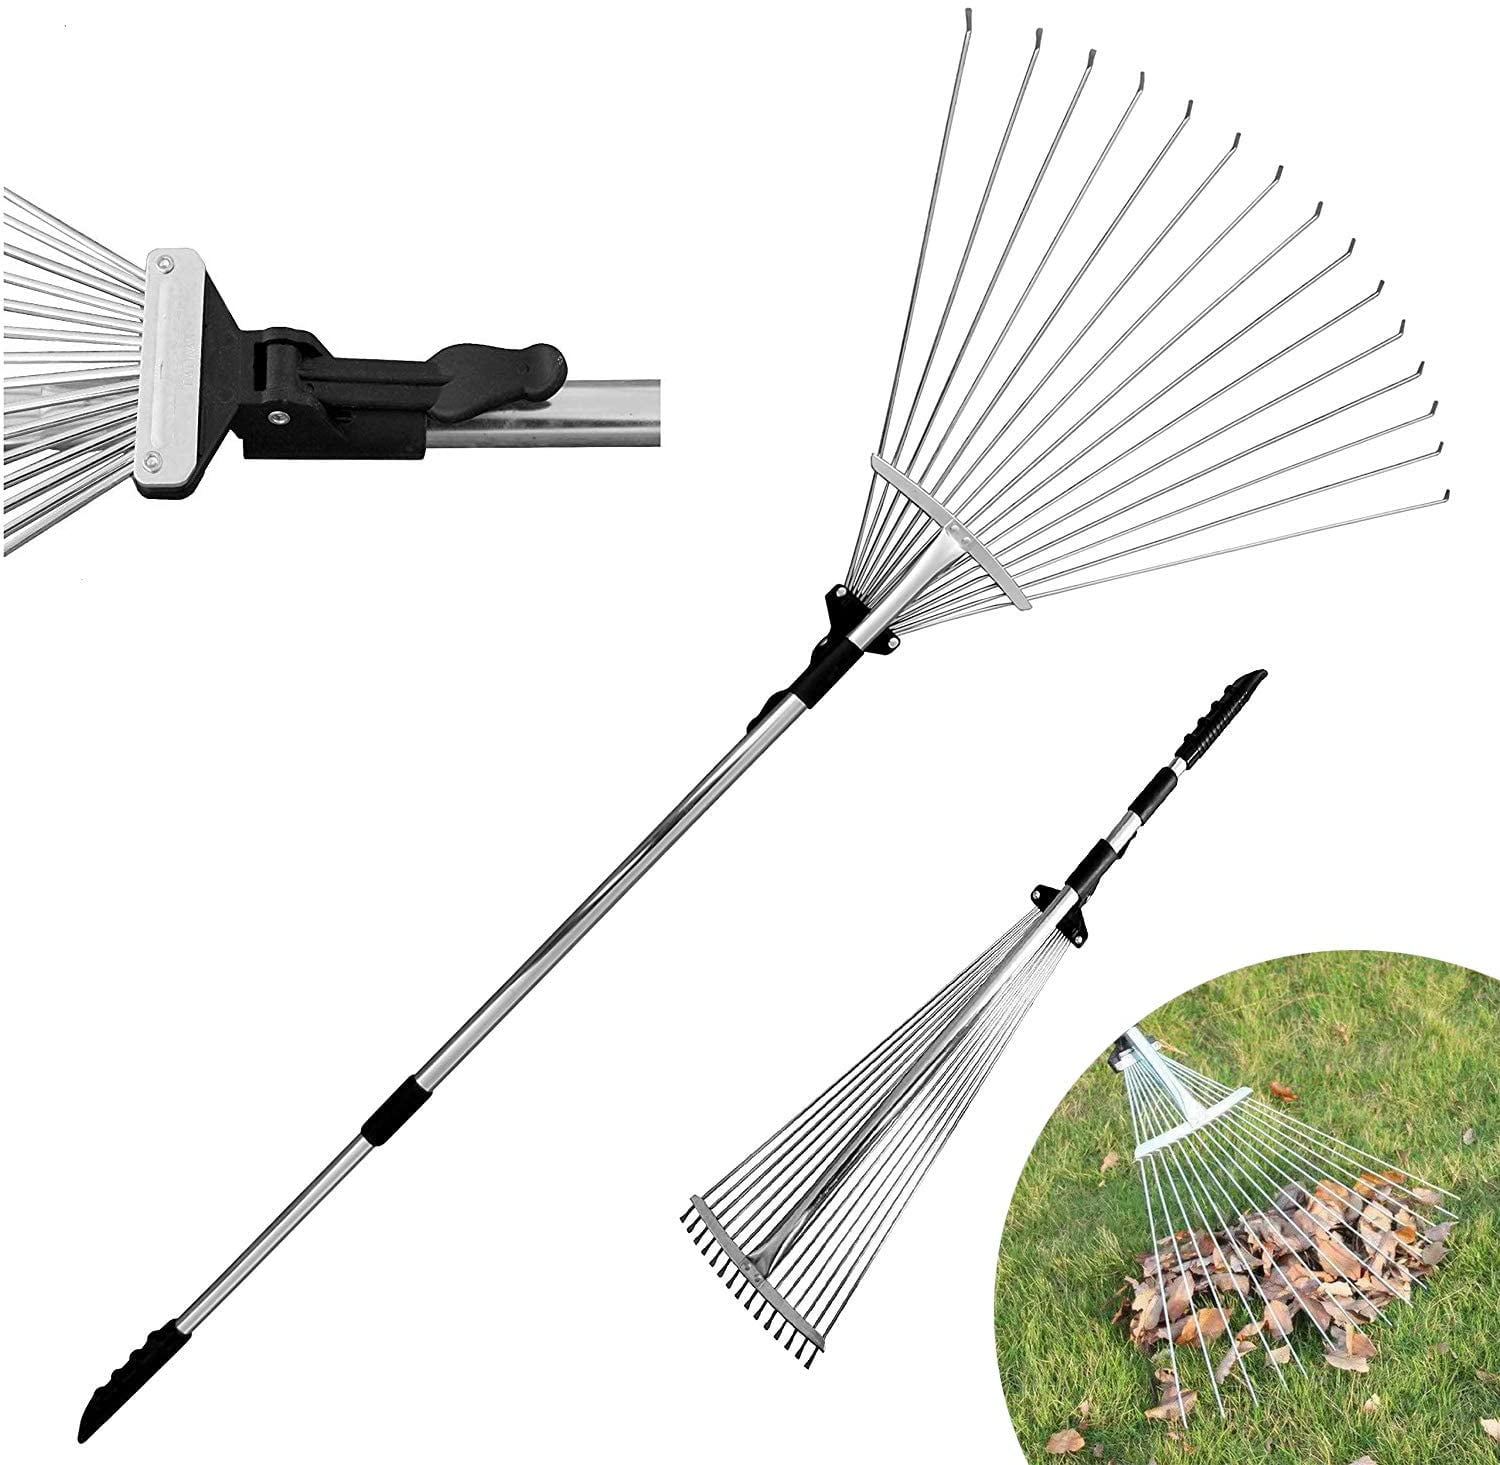 Collect Leaf Among Delicate Plants,Lawns and Yards Expanding Metal Rake gonicc 63 inch Professional Adjustable Garden Leaf Rake Adjustable Folding Head from 7 Inch to 22 Inch 